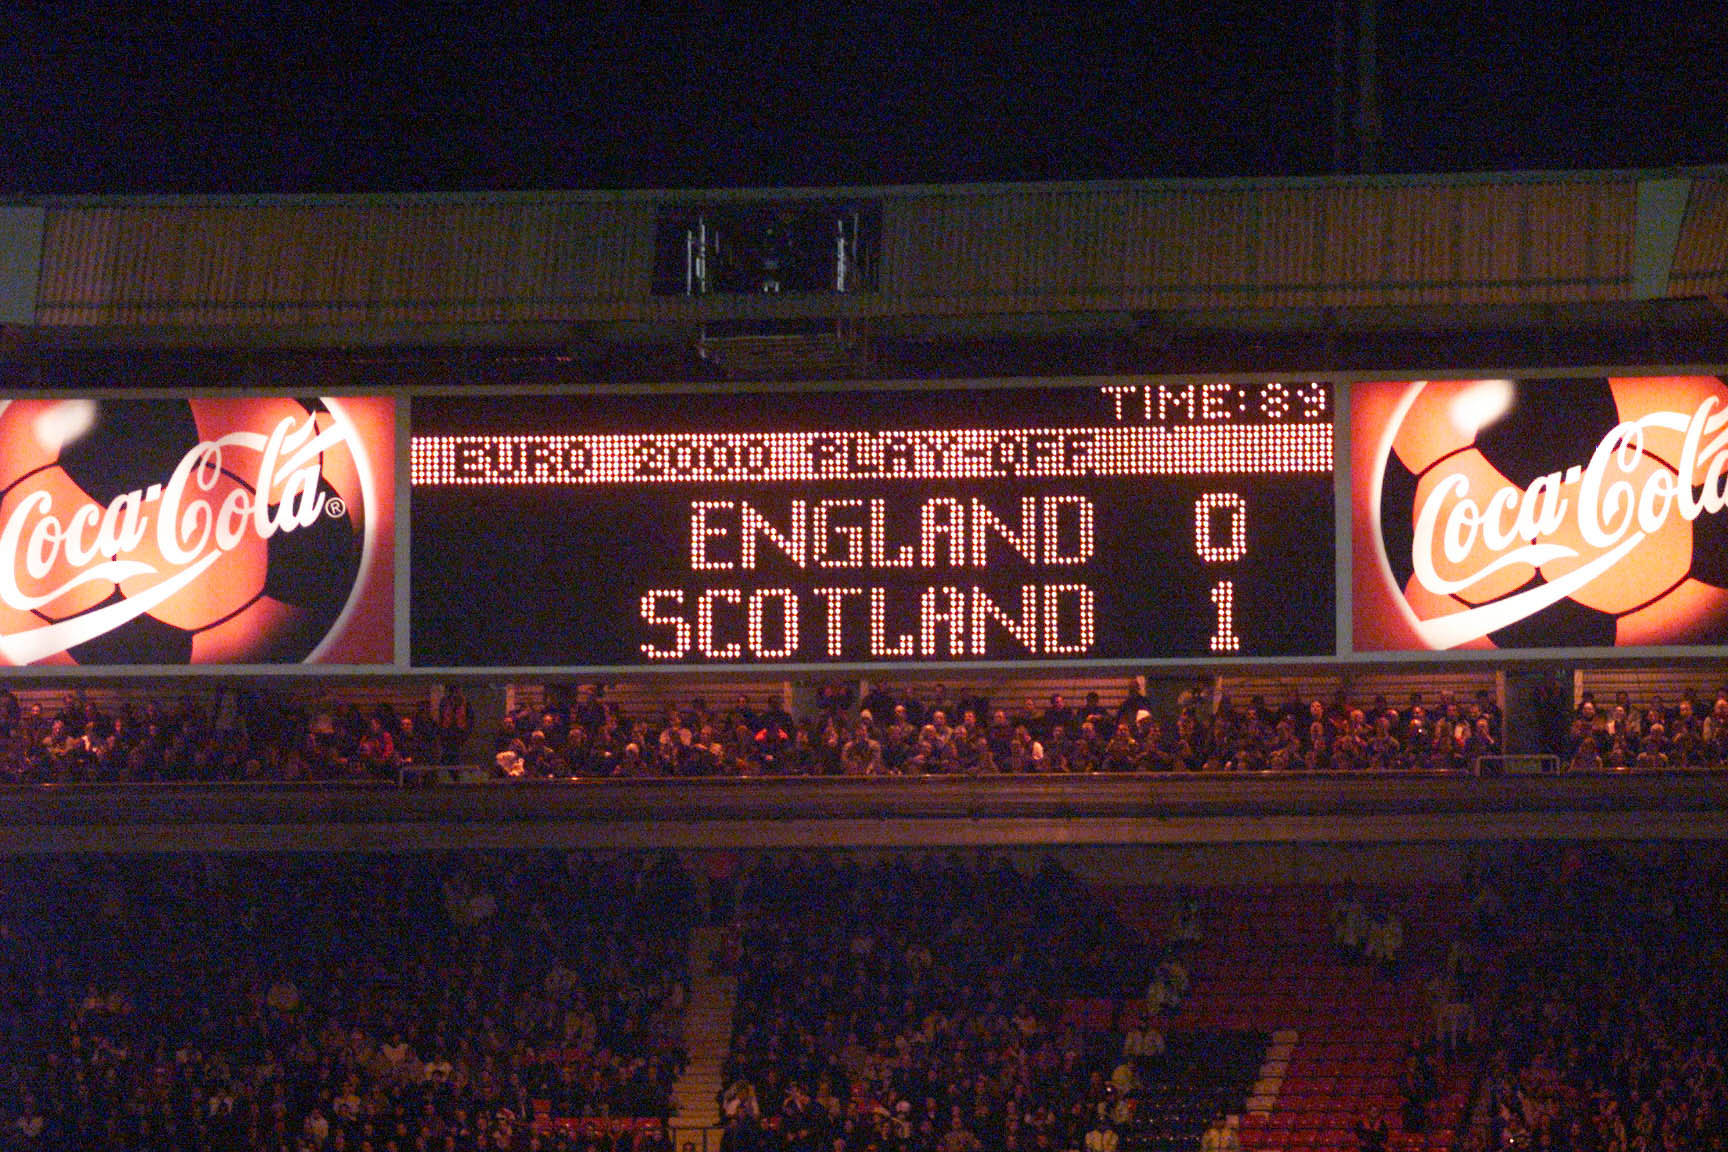 The scoreboard doesn't tell the full story as Scotland fail to reach Euro 2000.